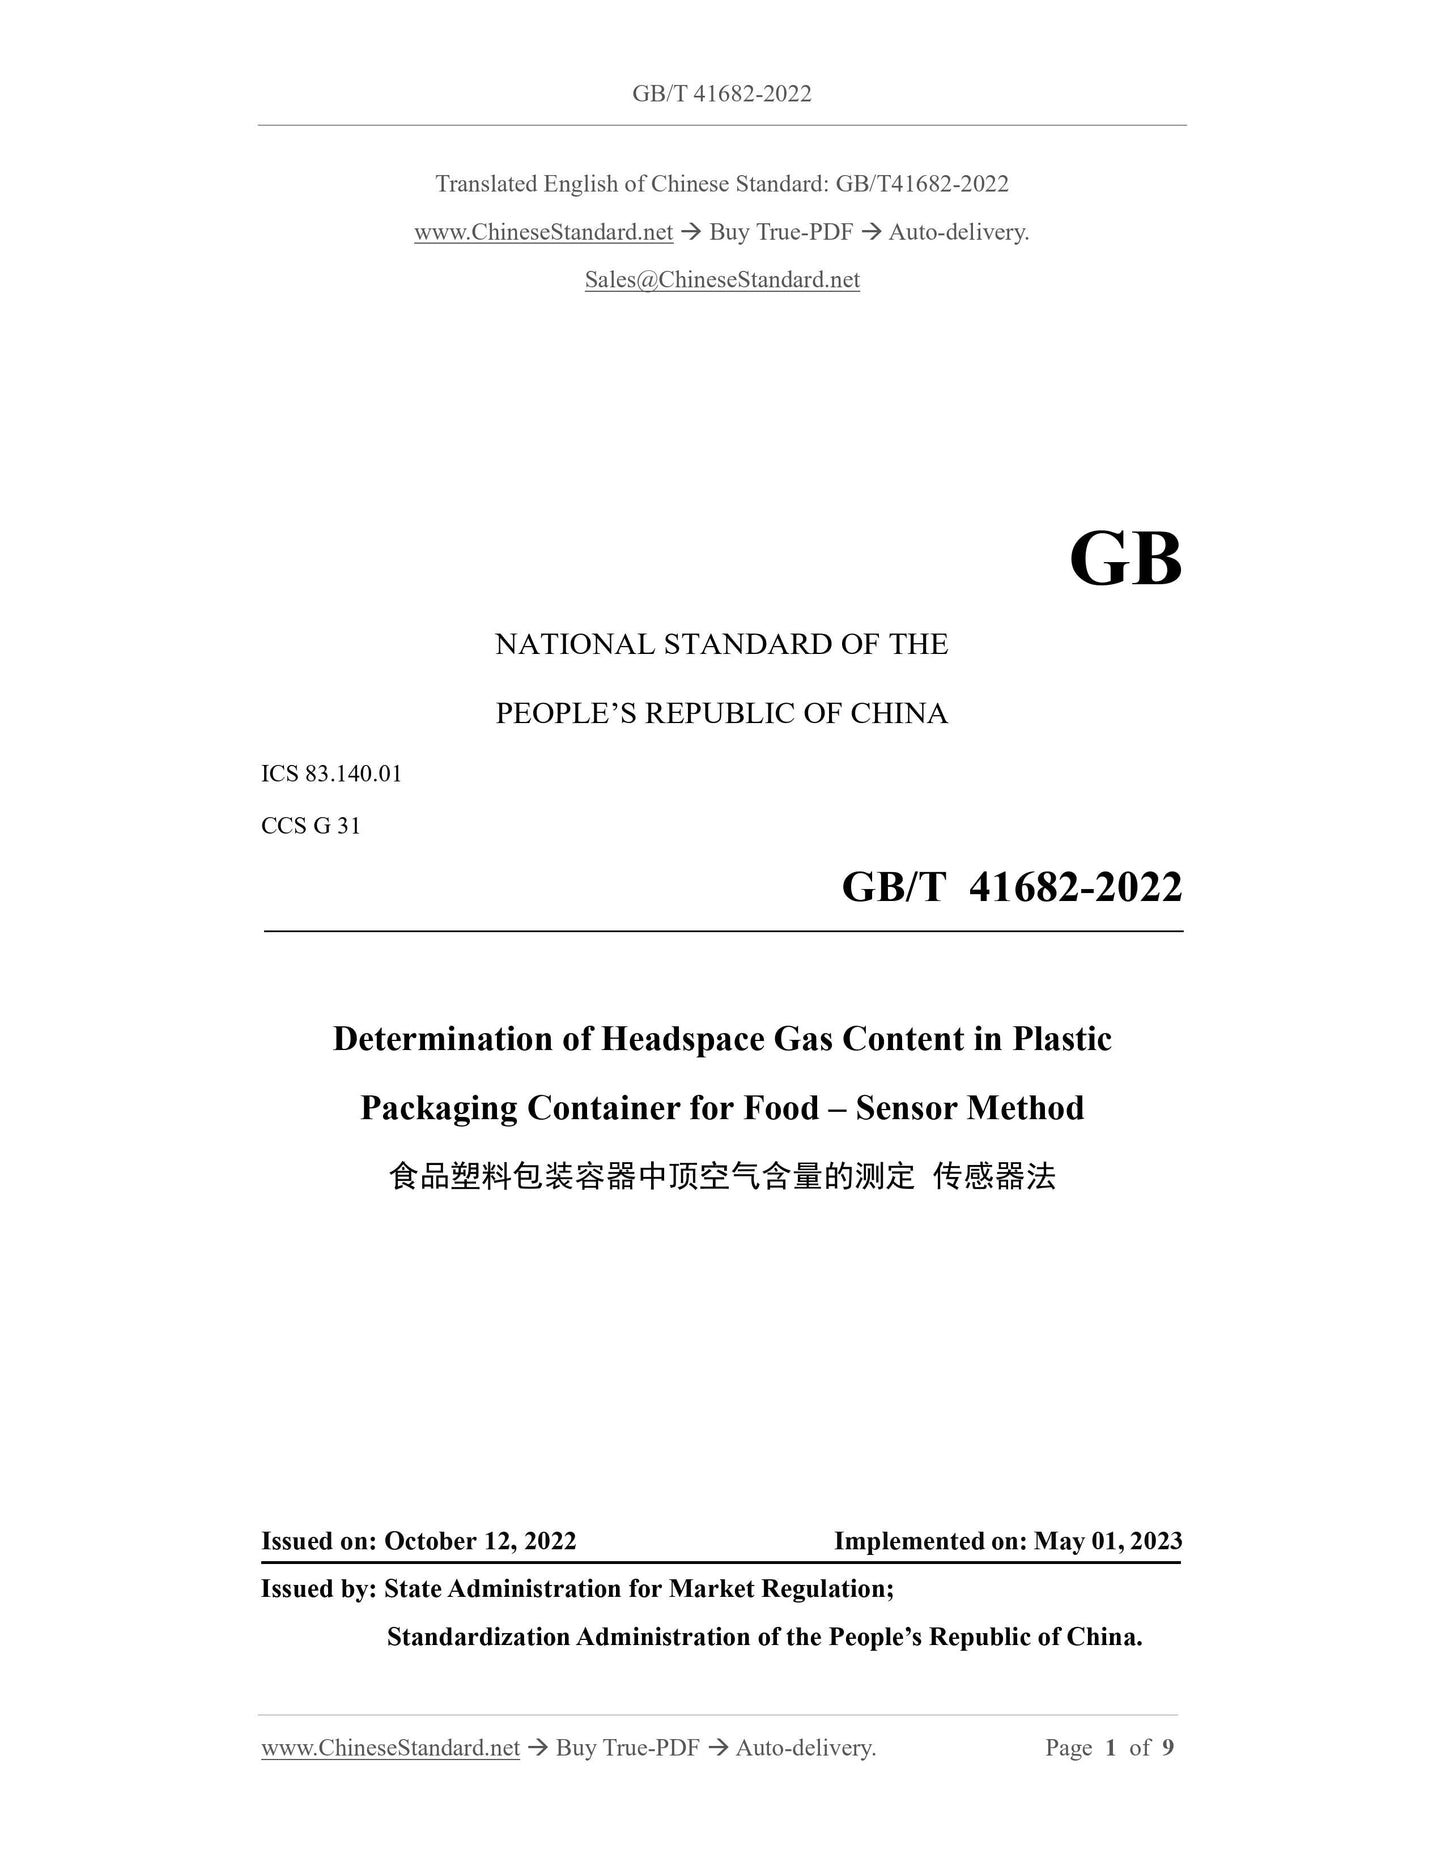 GB/T 41682-2022 Page 1